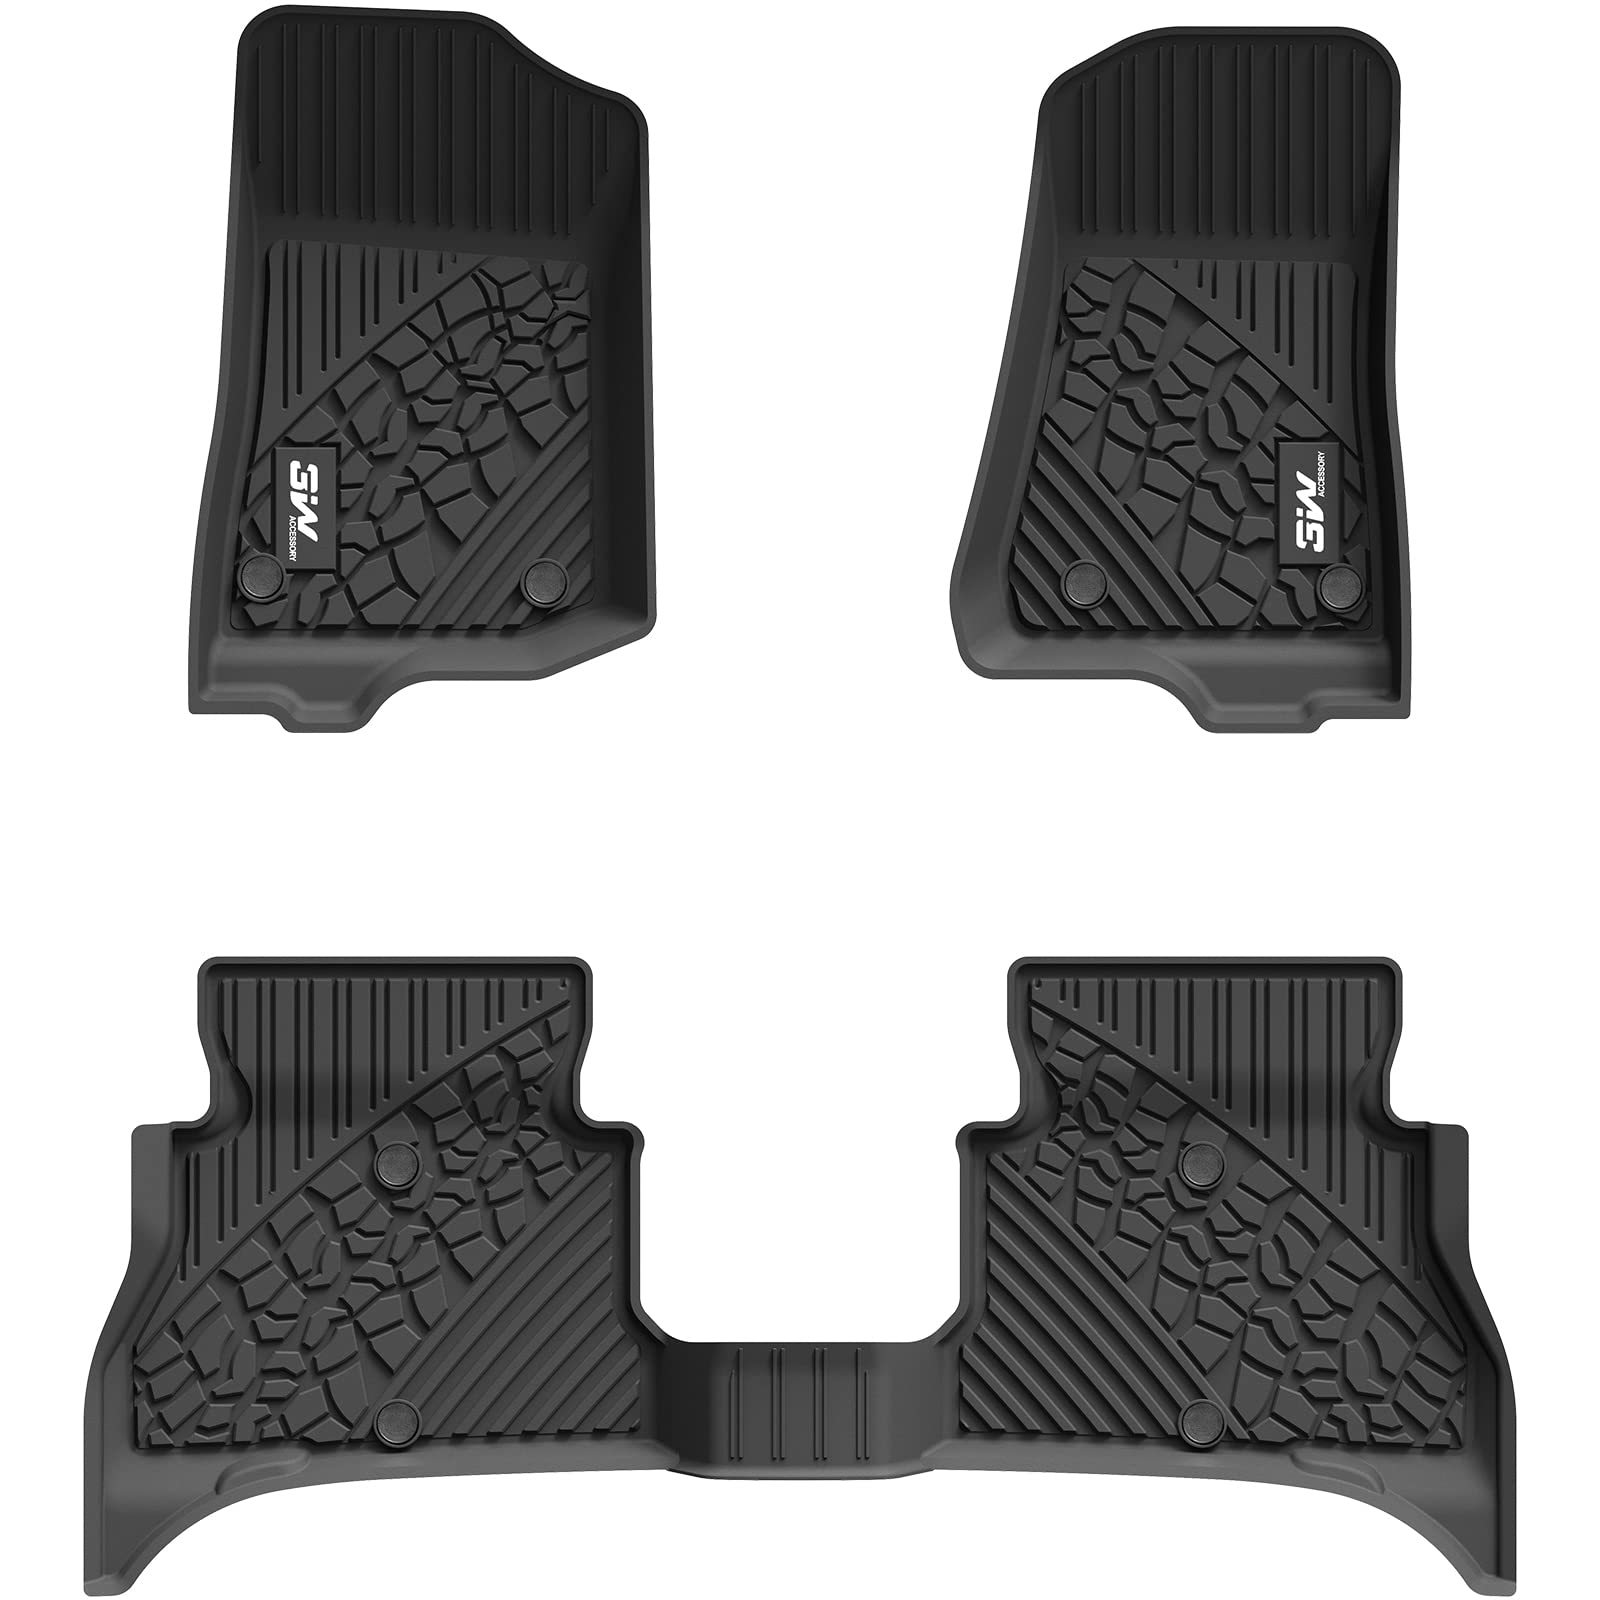 3W Jeep Wrangler 4XE Custom Floor Mats 2021-2024 Hybrid 4 Door TPE Material & All-Weather Protection Vehicles & Parts 3W 2021-2024 Wrangler 4XE 2021-2024 1st&2nd Row Mats with White Logo